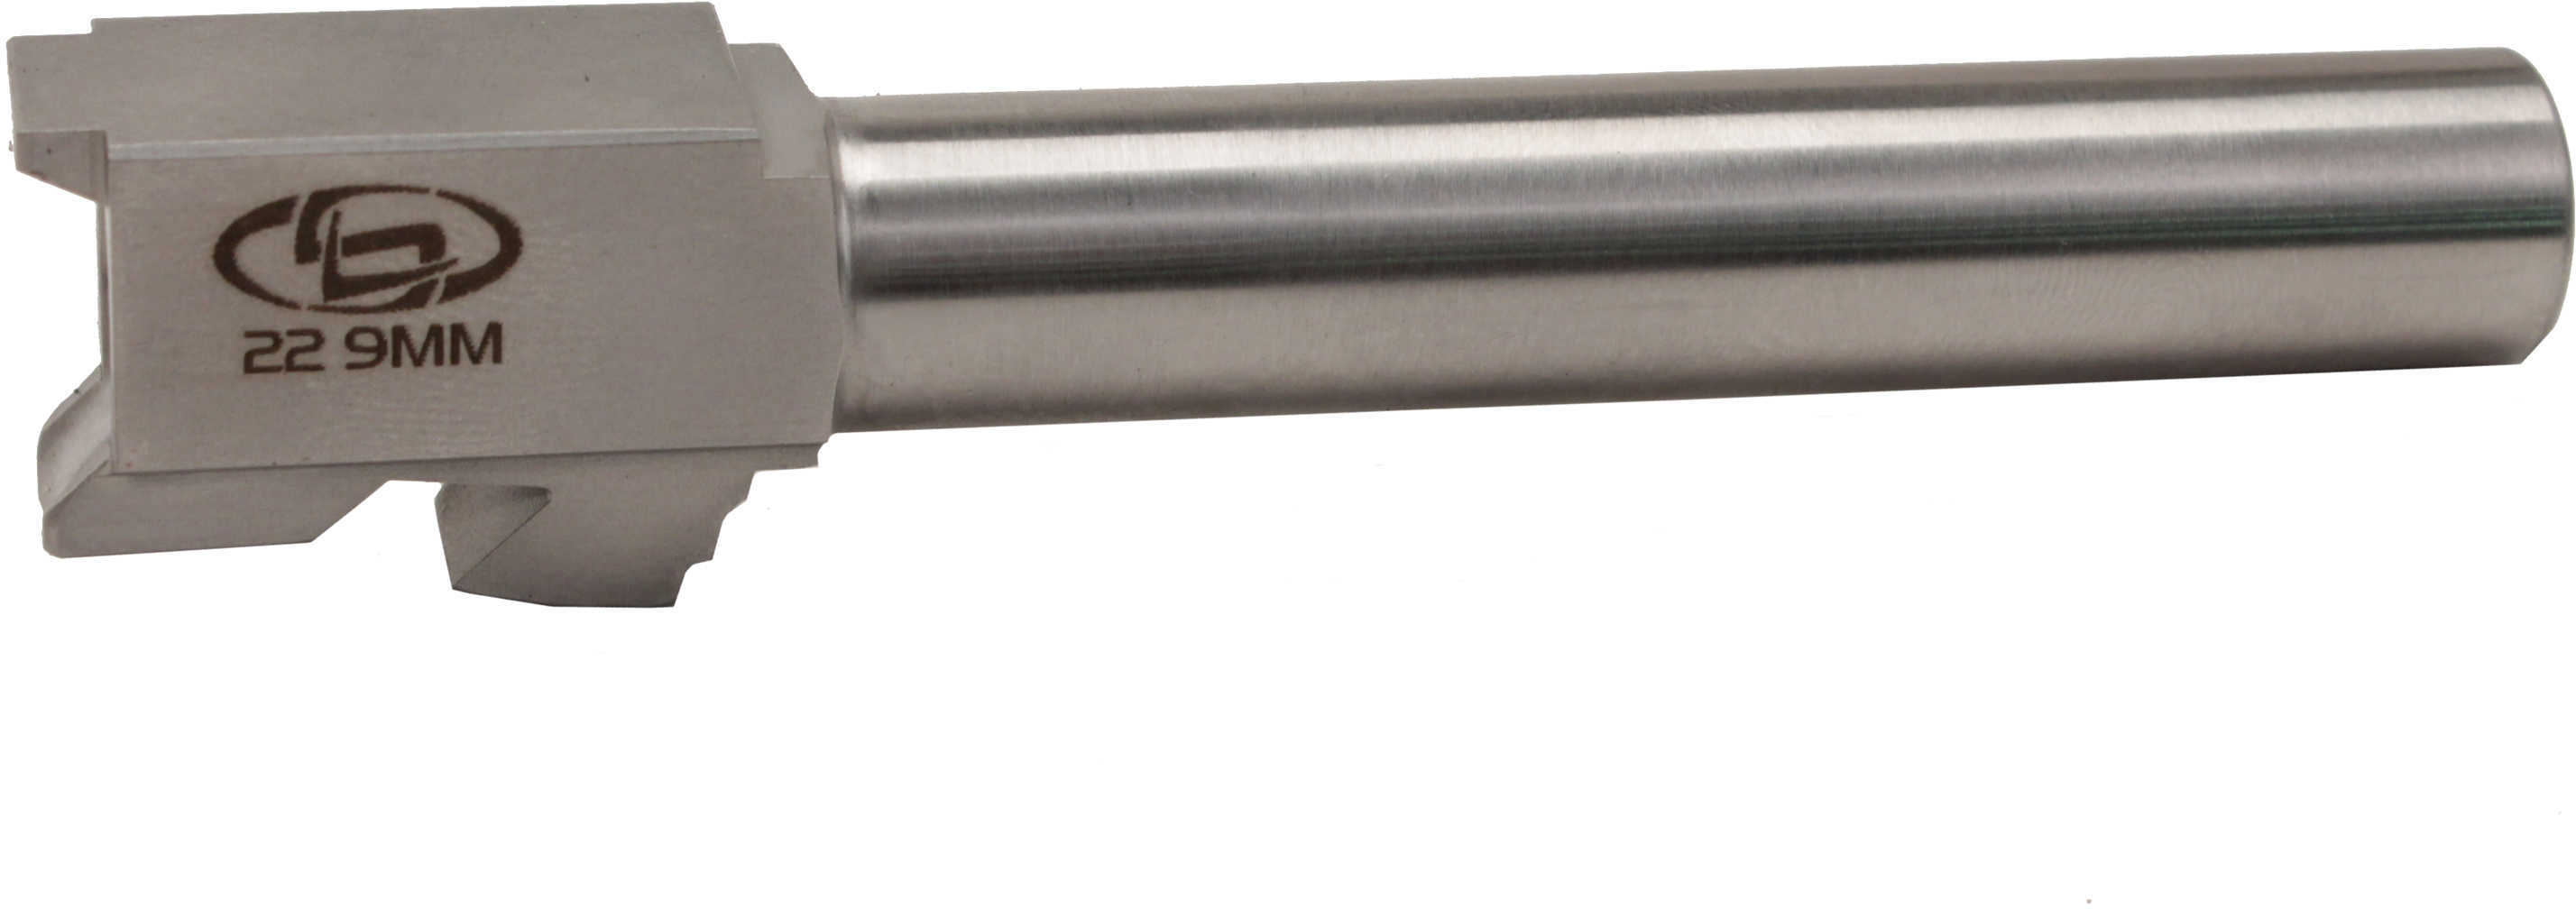 StormLake 34033 for Glock Compatible Standard 9mm Conversion for 40S&W/357Sig 4.5" Stainless Steel